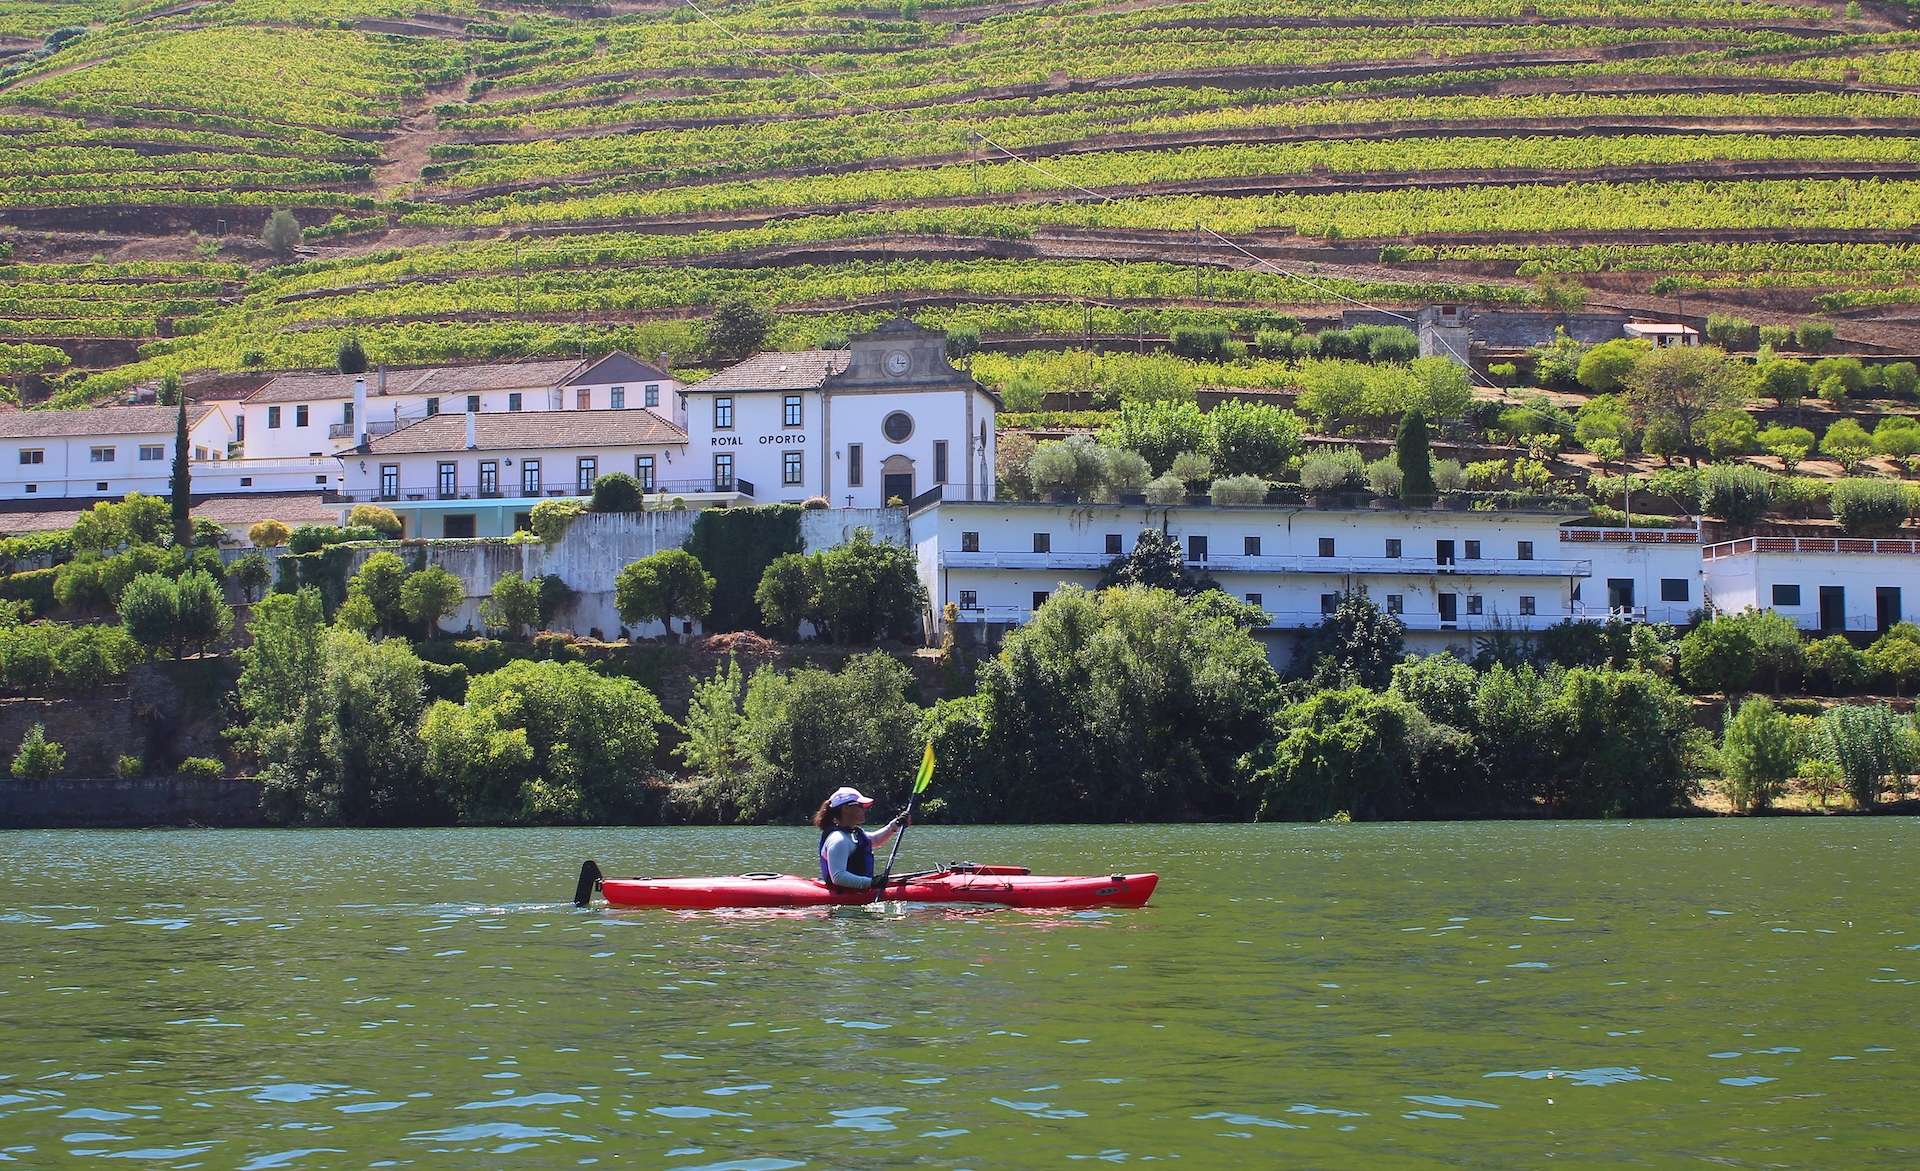 Woman kayaking on the Douro River in Portugal